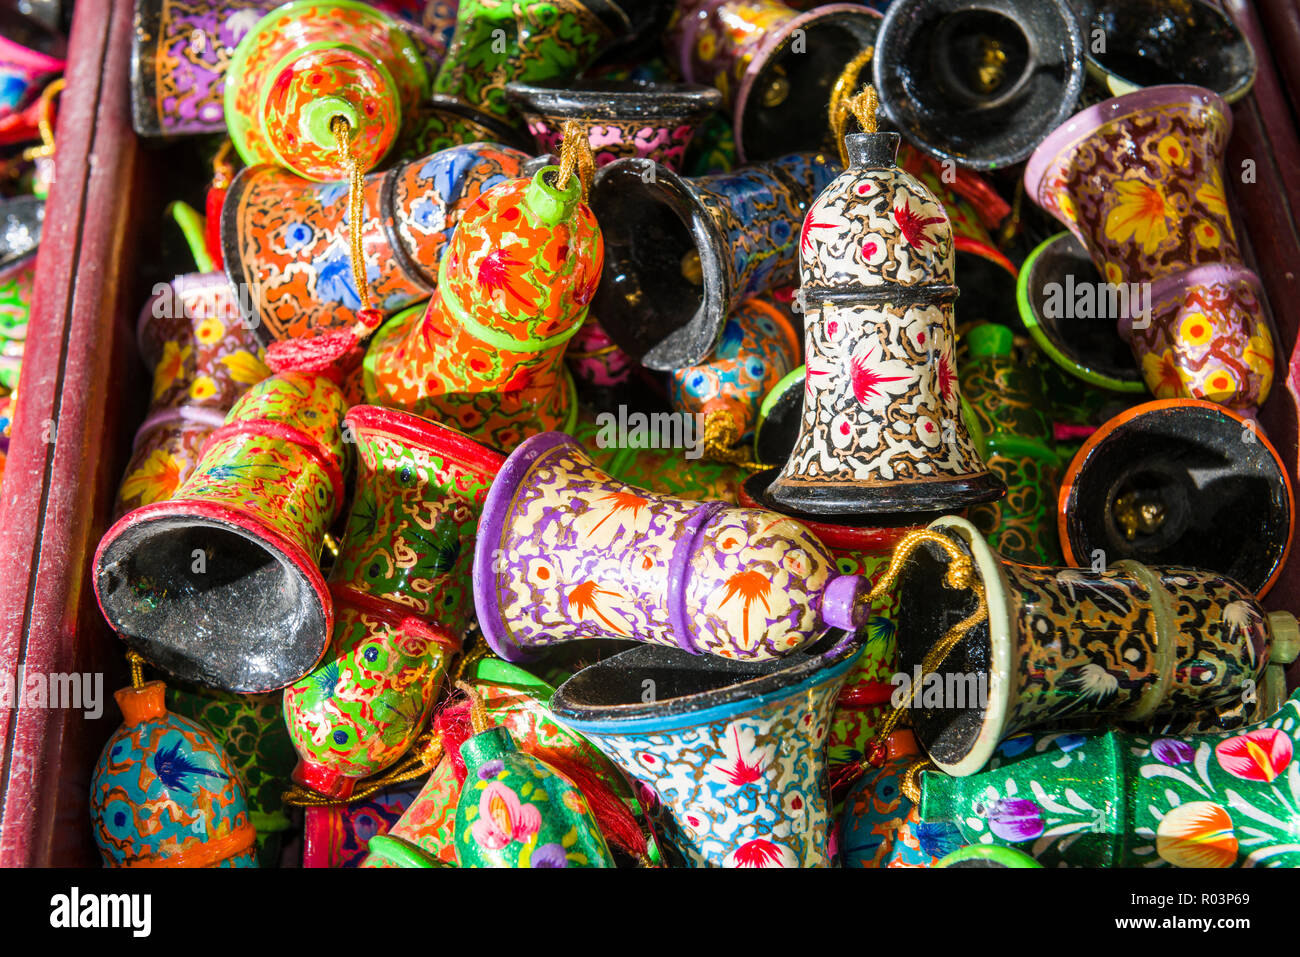 Paper mache is the material for many kashmiri souvenirs like bells, sold in little shops along Dal Lake Stock Photo